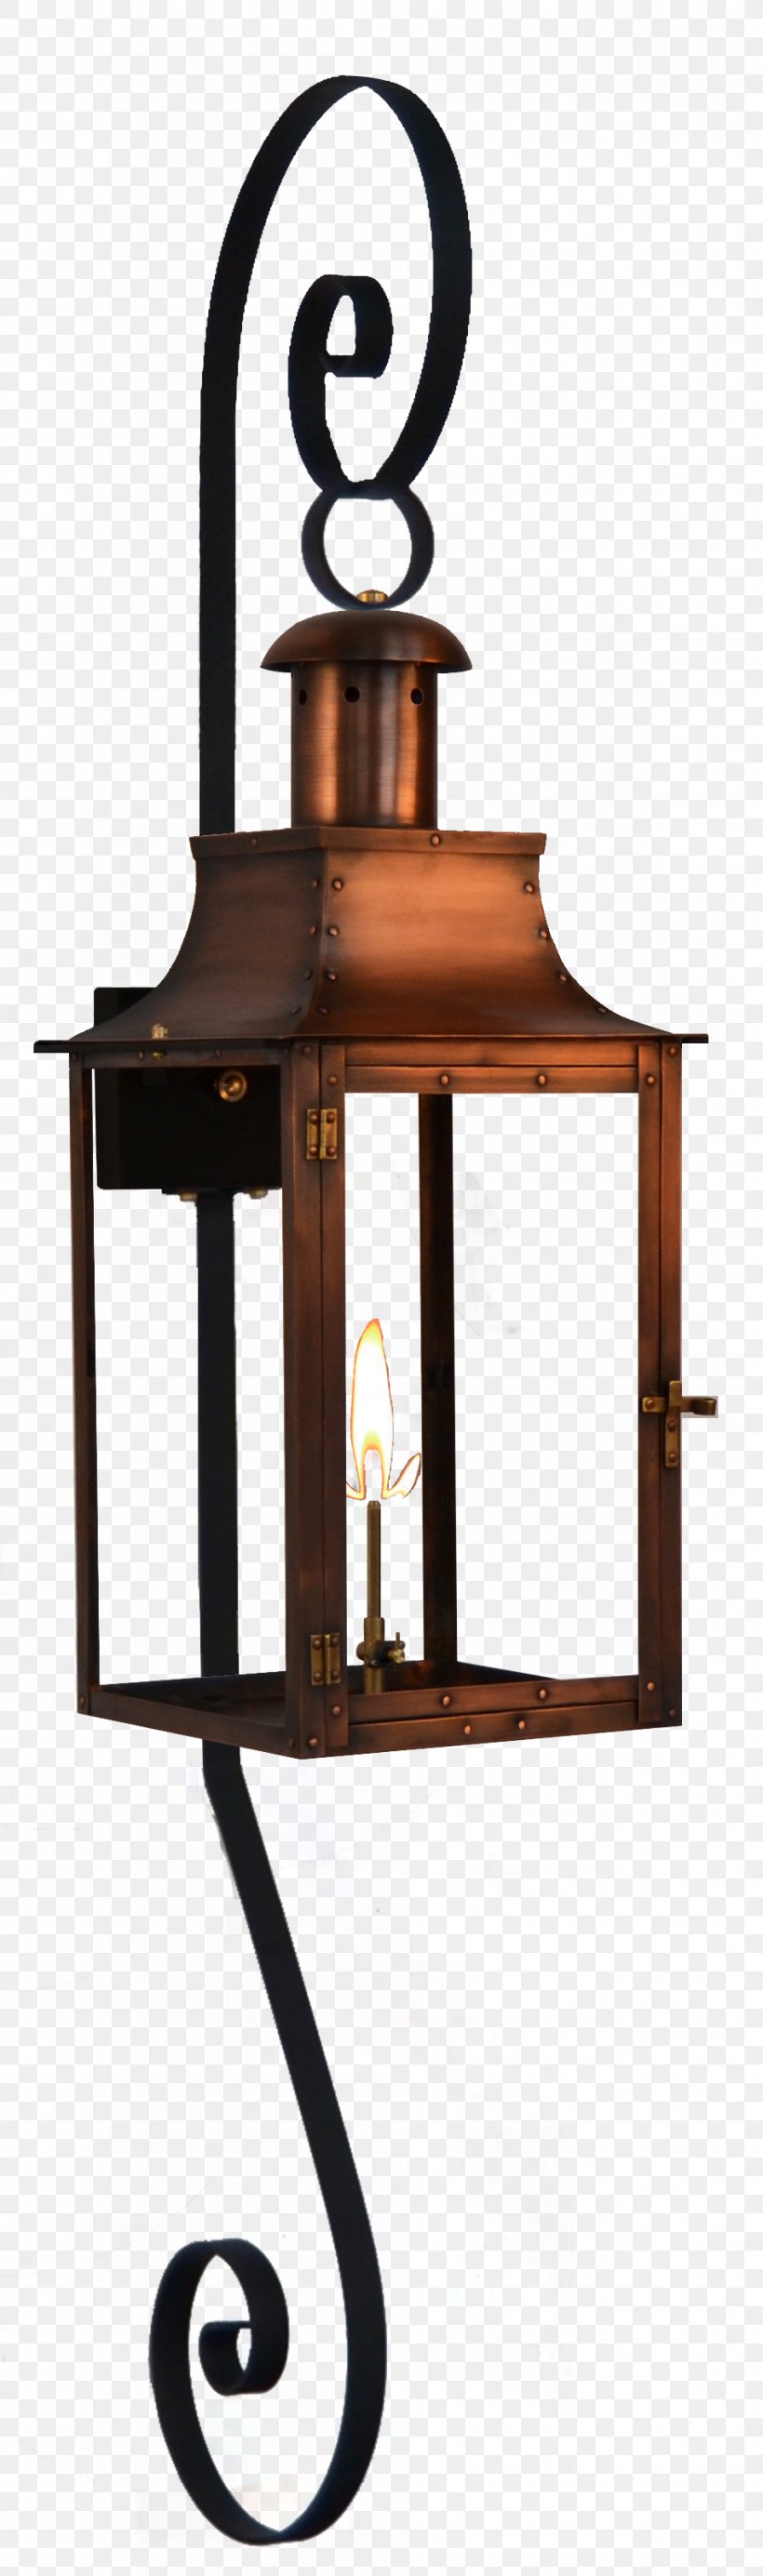 Light Fixture Lantern Coppersmith Bournemouth, PNG, 952x3217px, Light Fixture, Bournemouth, Building, Copper, Coppersmith Download Free